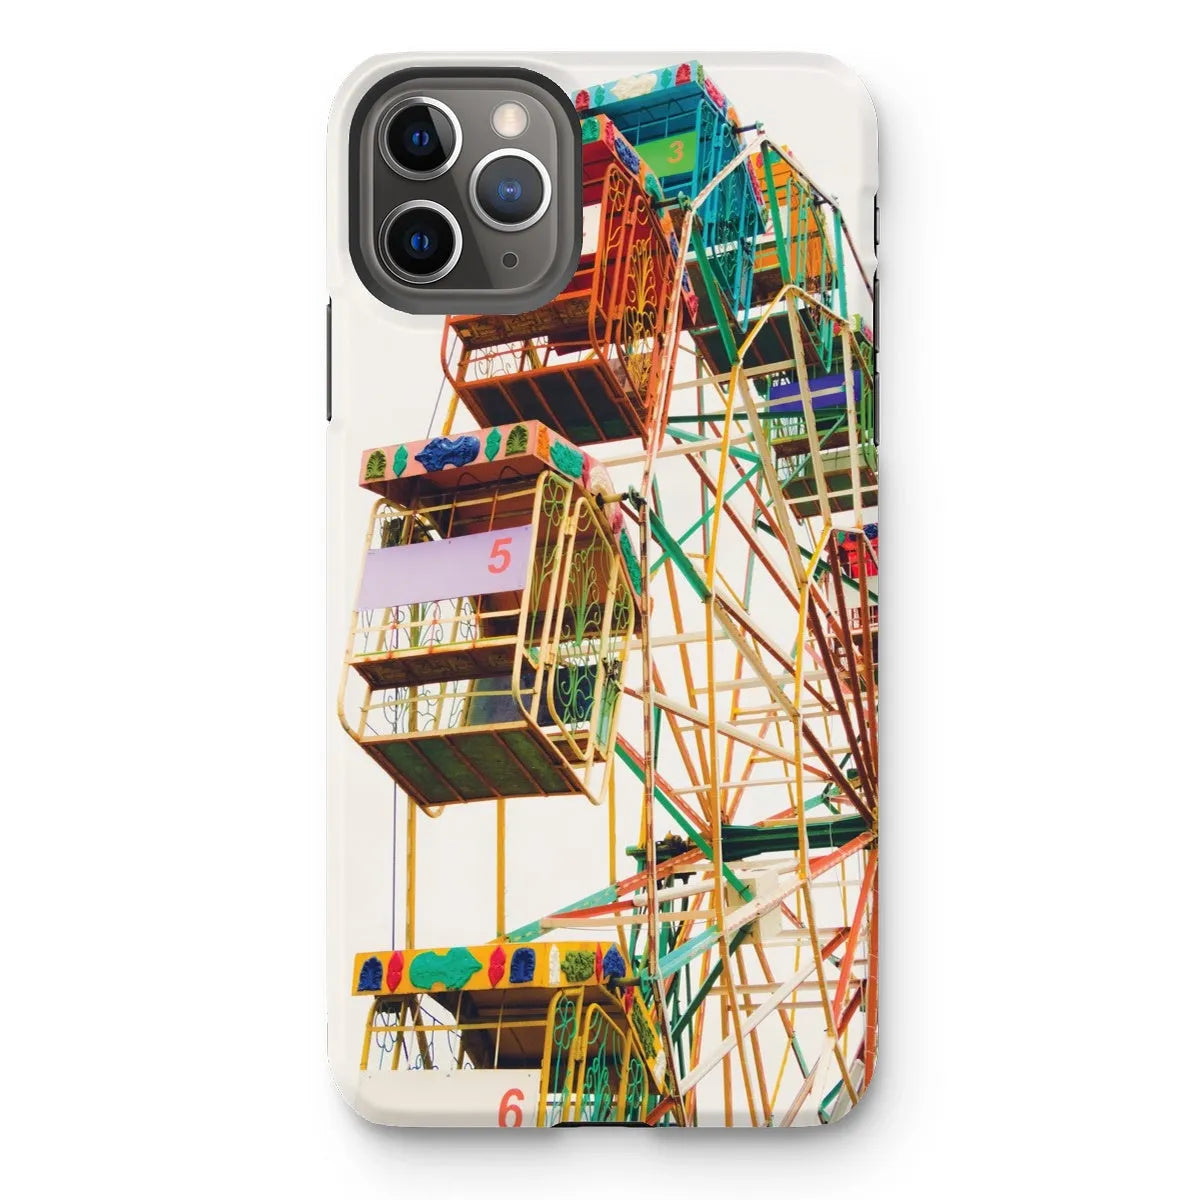 Wheel Of Fortune Tough Phone Case - Iphone 11 Pro Max / Matte - Mobile Phone Cases - Aesthetic Art